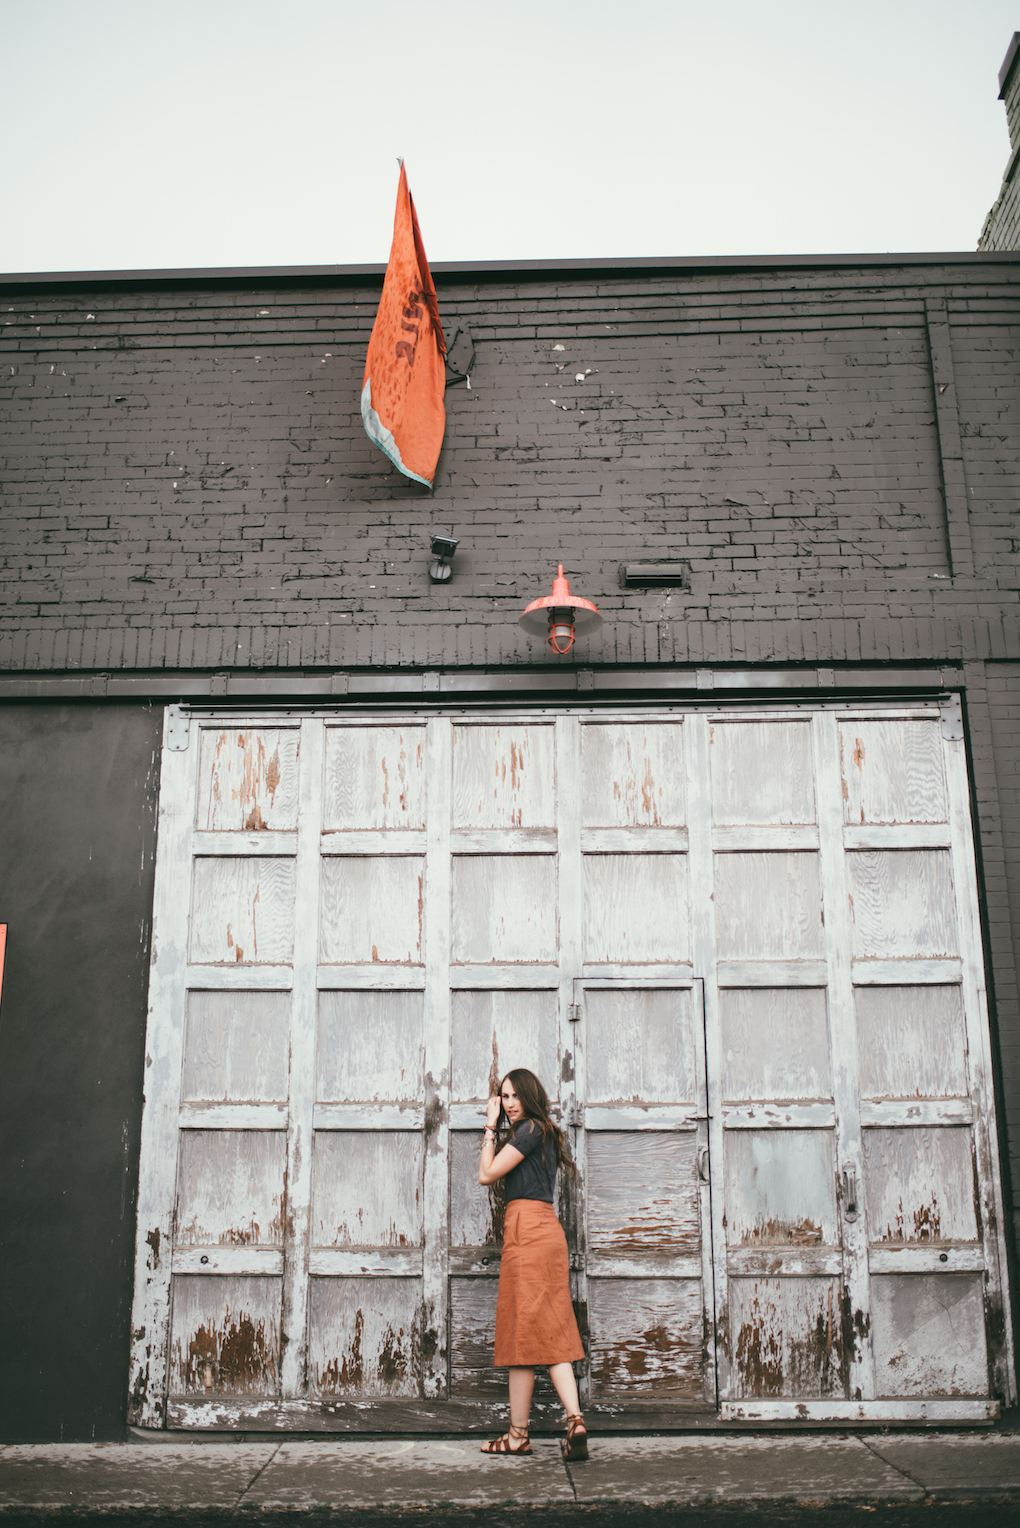 orange button up midi skirt with grey tee shirt girl standing in front of old distressed white garage door